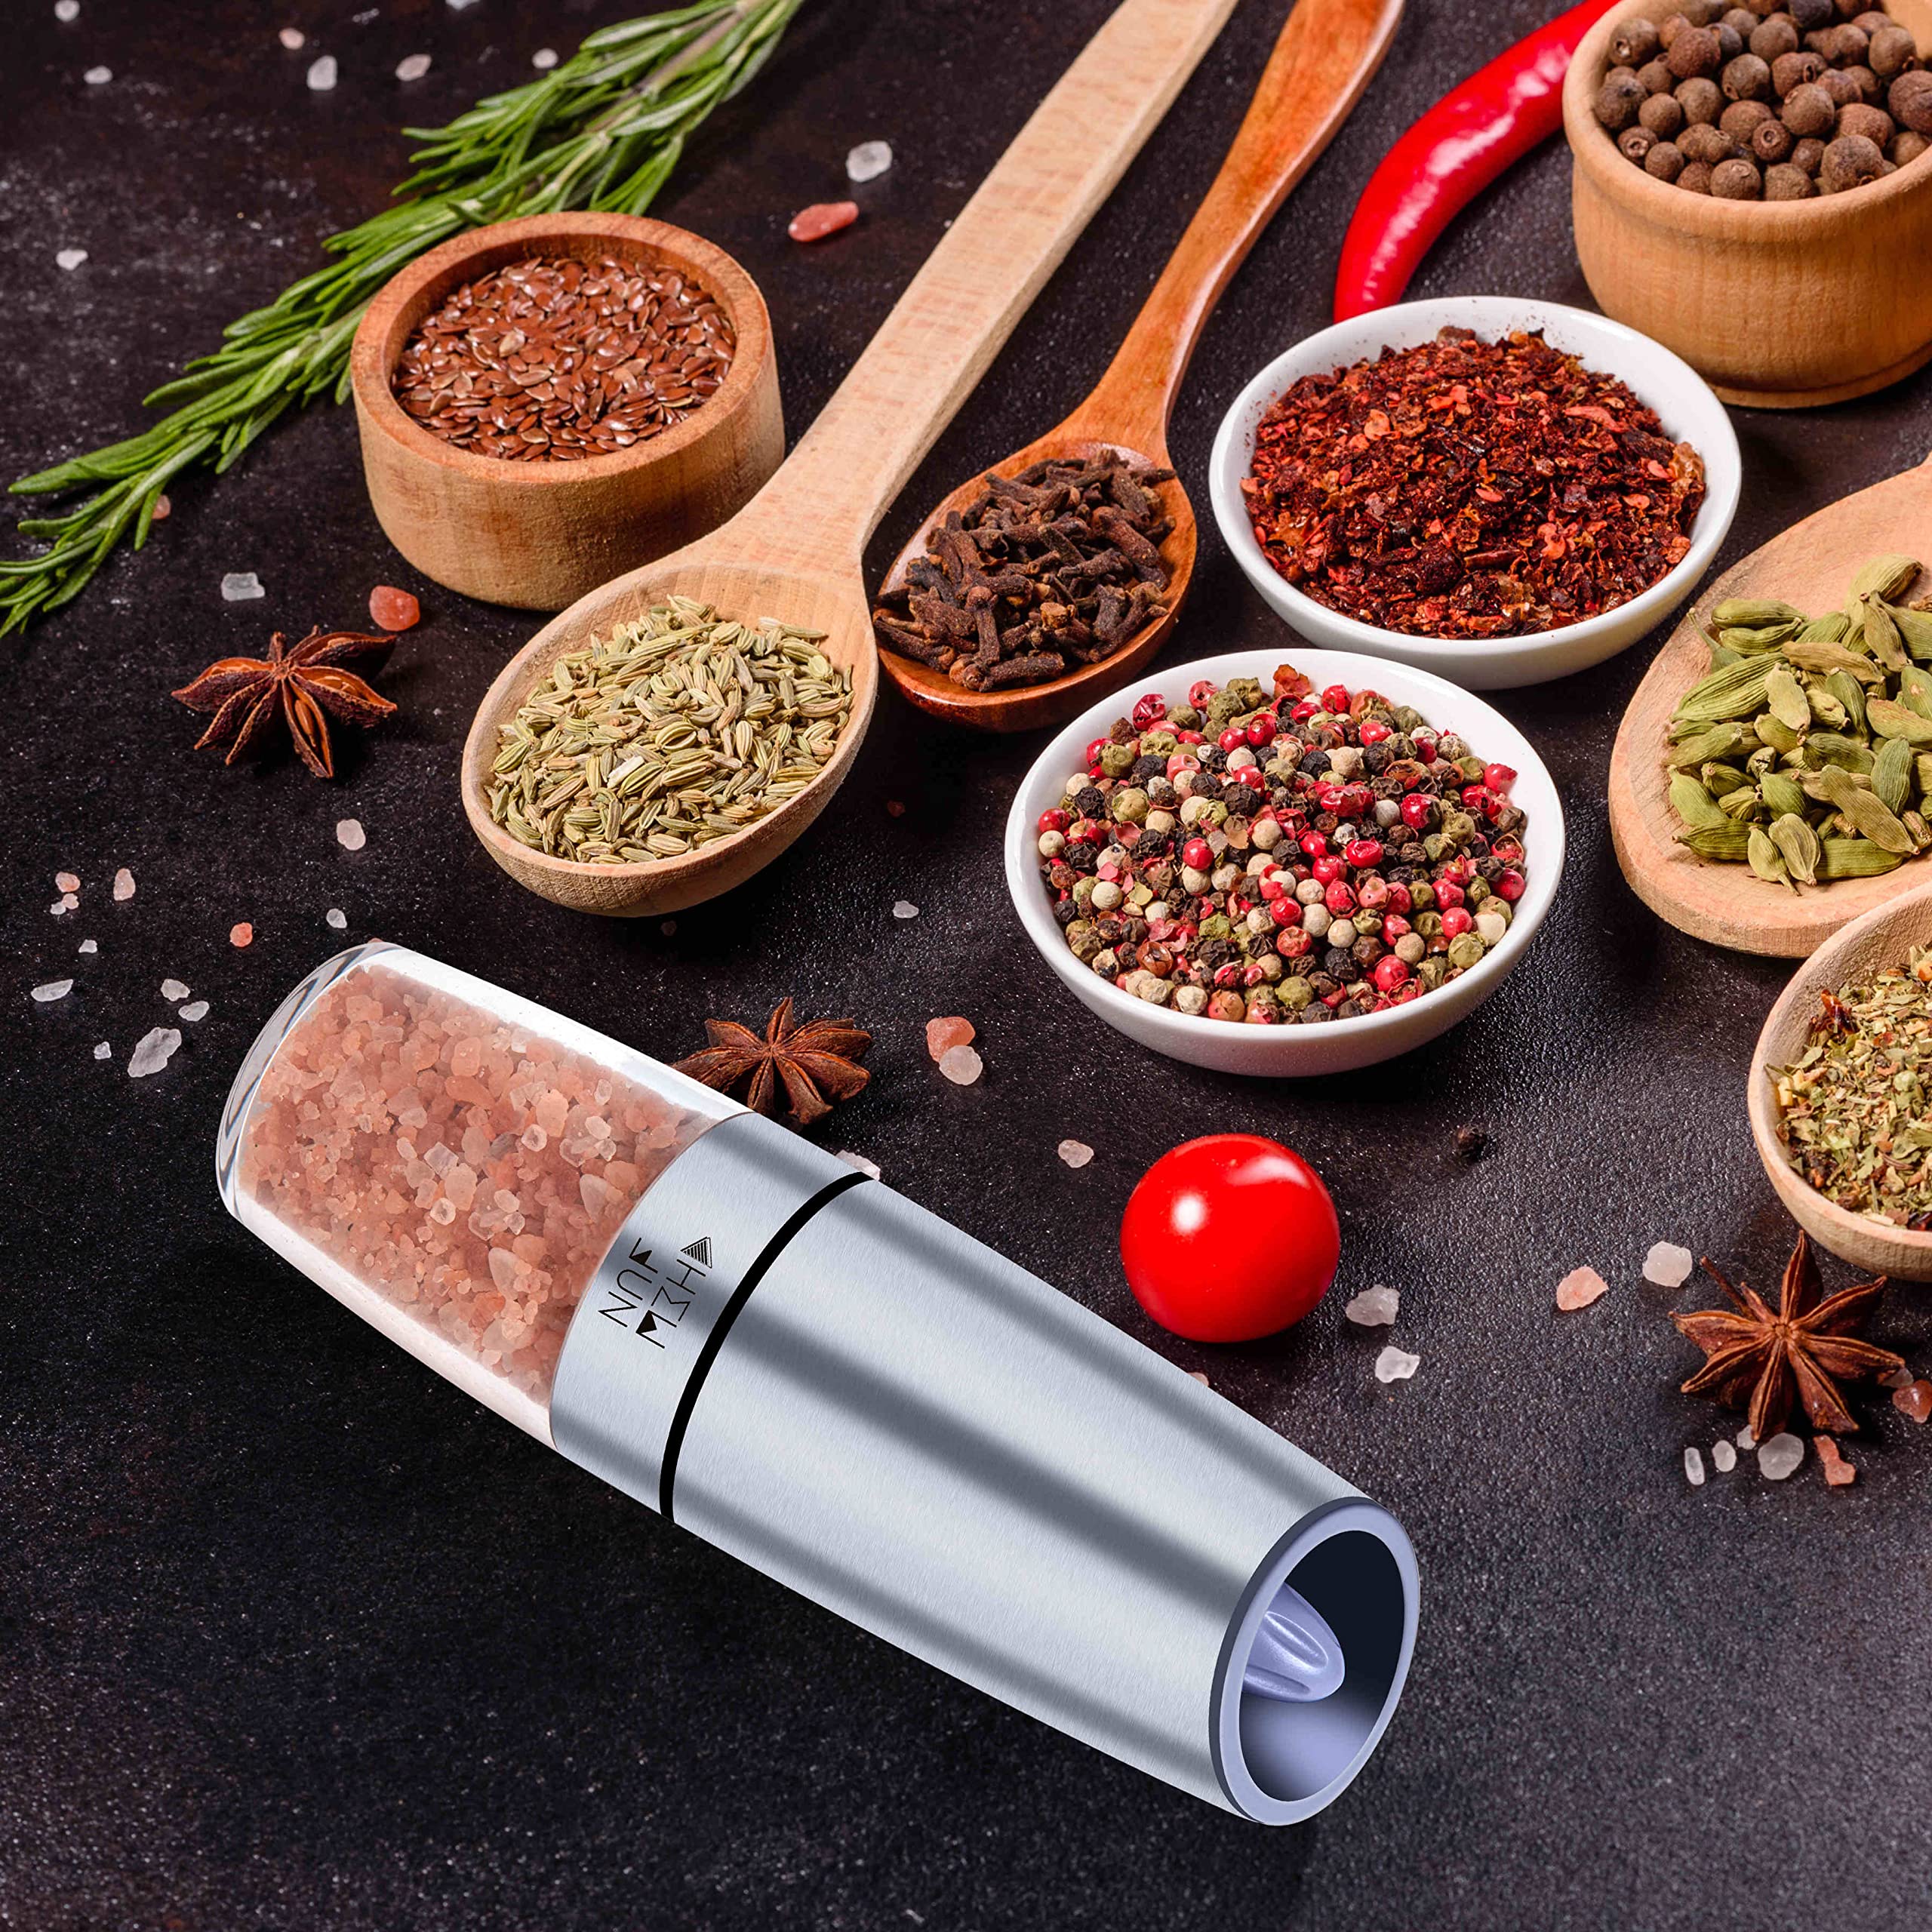 Gravity Salt and Pepper Mill Set with Adjustable Coarseness Automatic Pepper and Salt Grinder Battery Powered with Blue LED Light,One Hand Operated,Brushed Stainless Steel by CHEW FUN